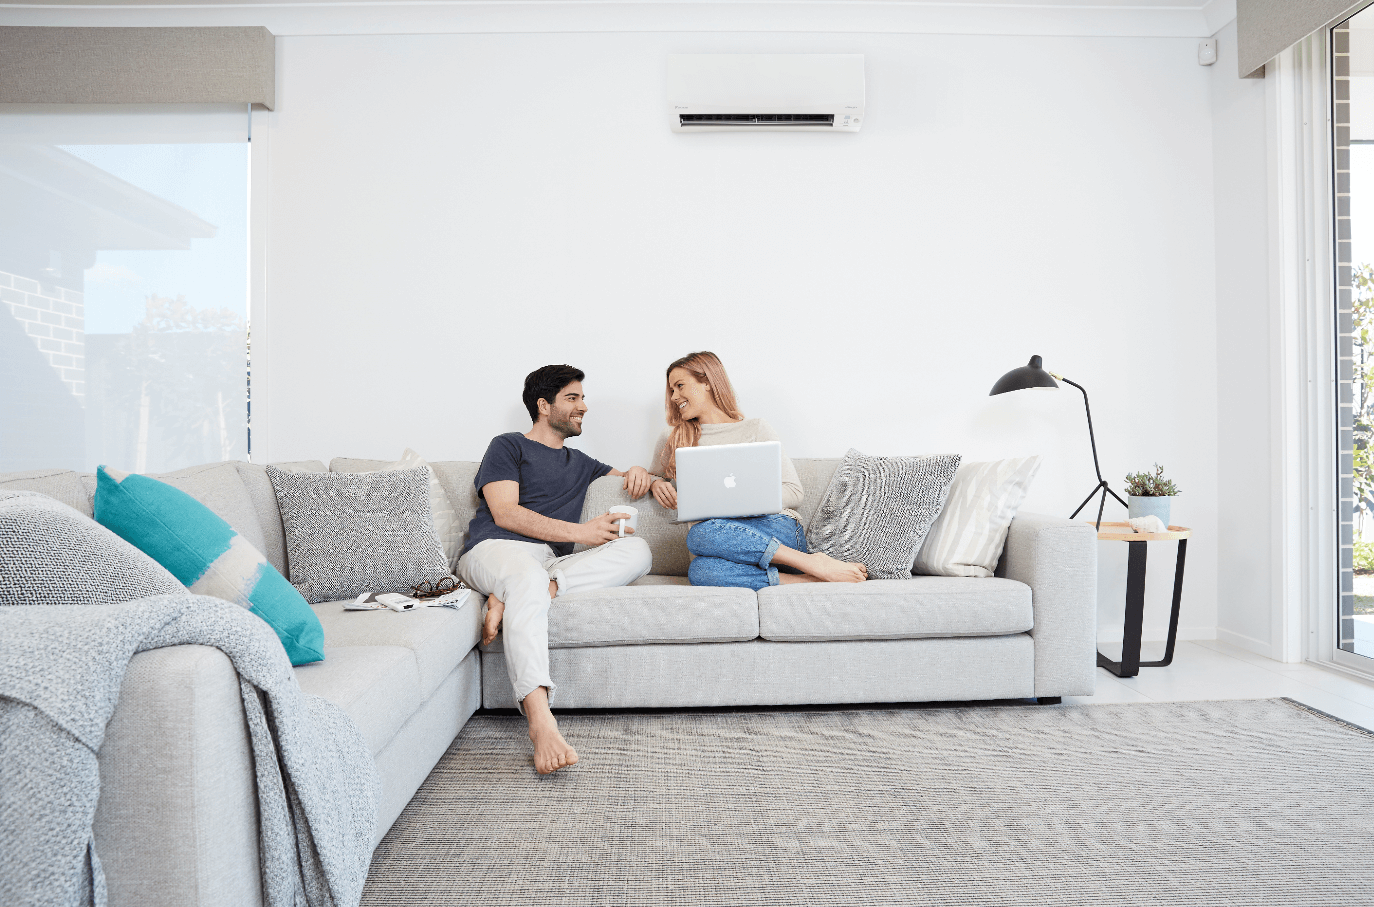 Why installing a heat pump is such a wise decision